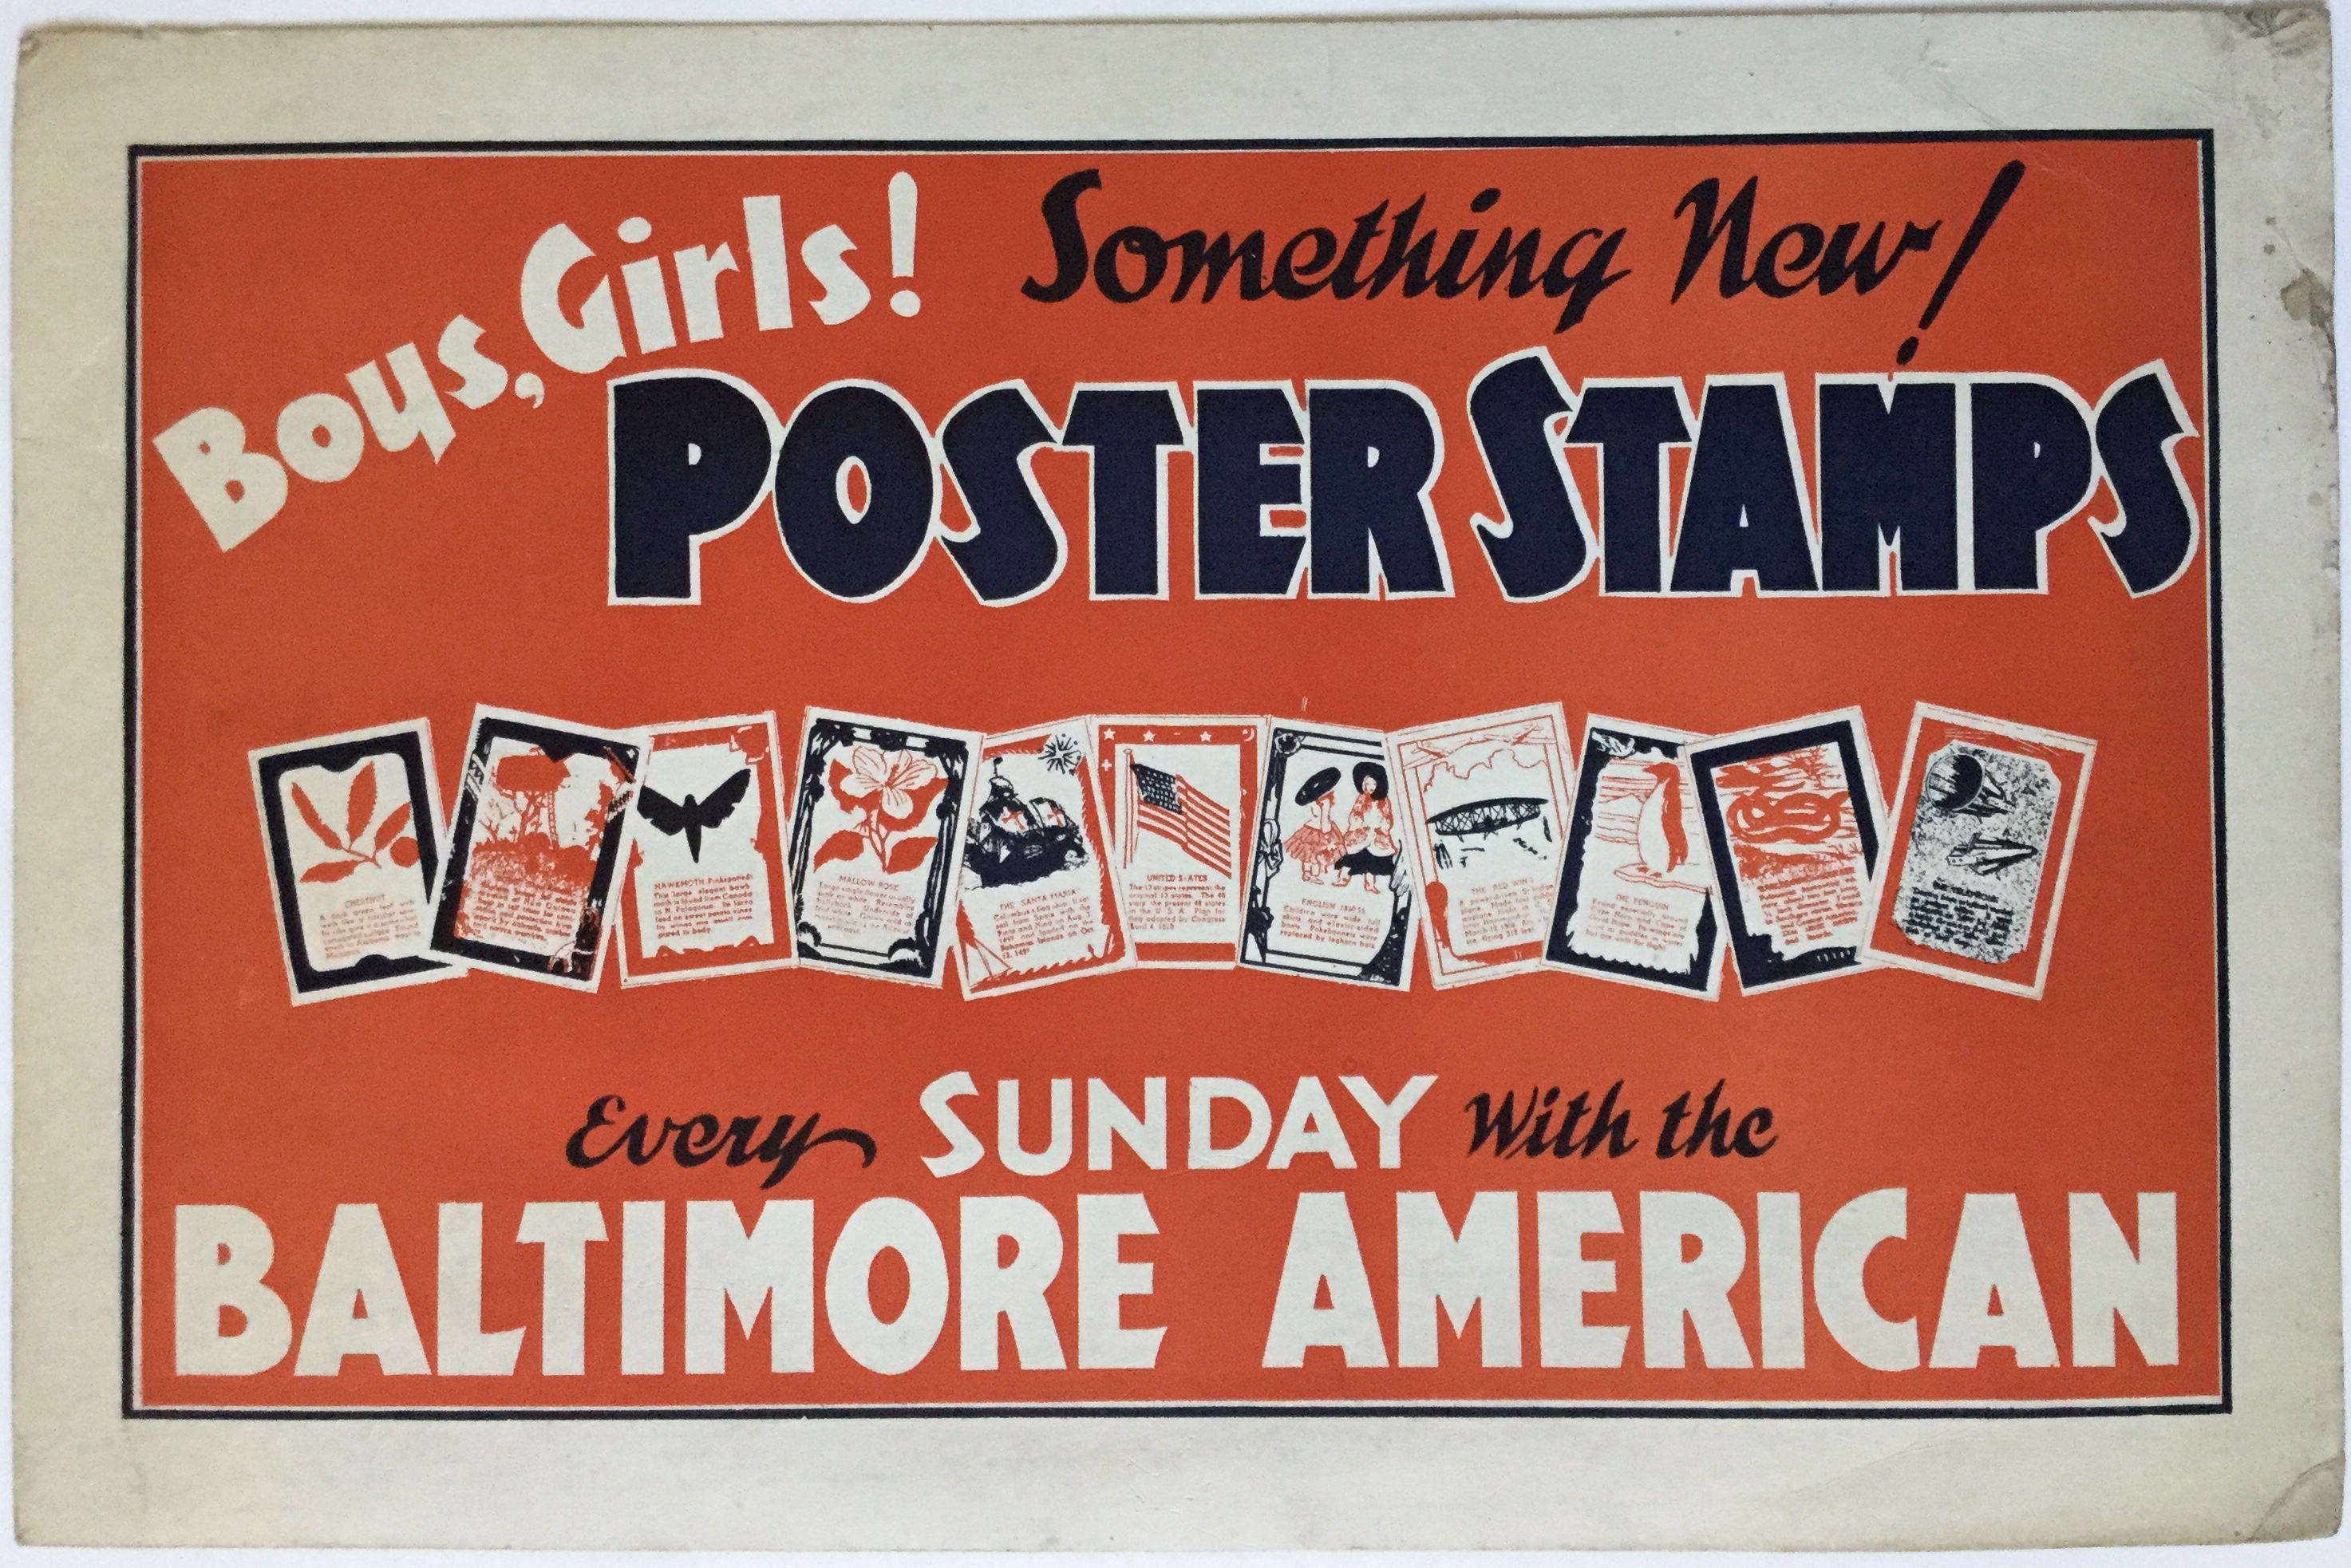 J431	POSTER STAMPS - SOMETHING NEW EVERY SUNDAY WITH THE BALTIMORE AMERICAN